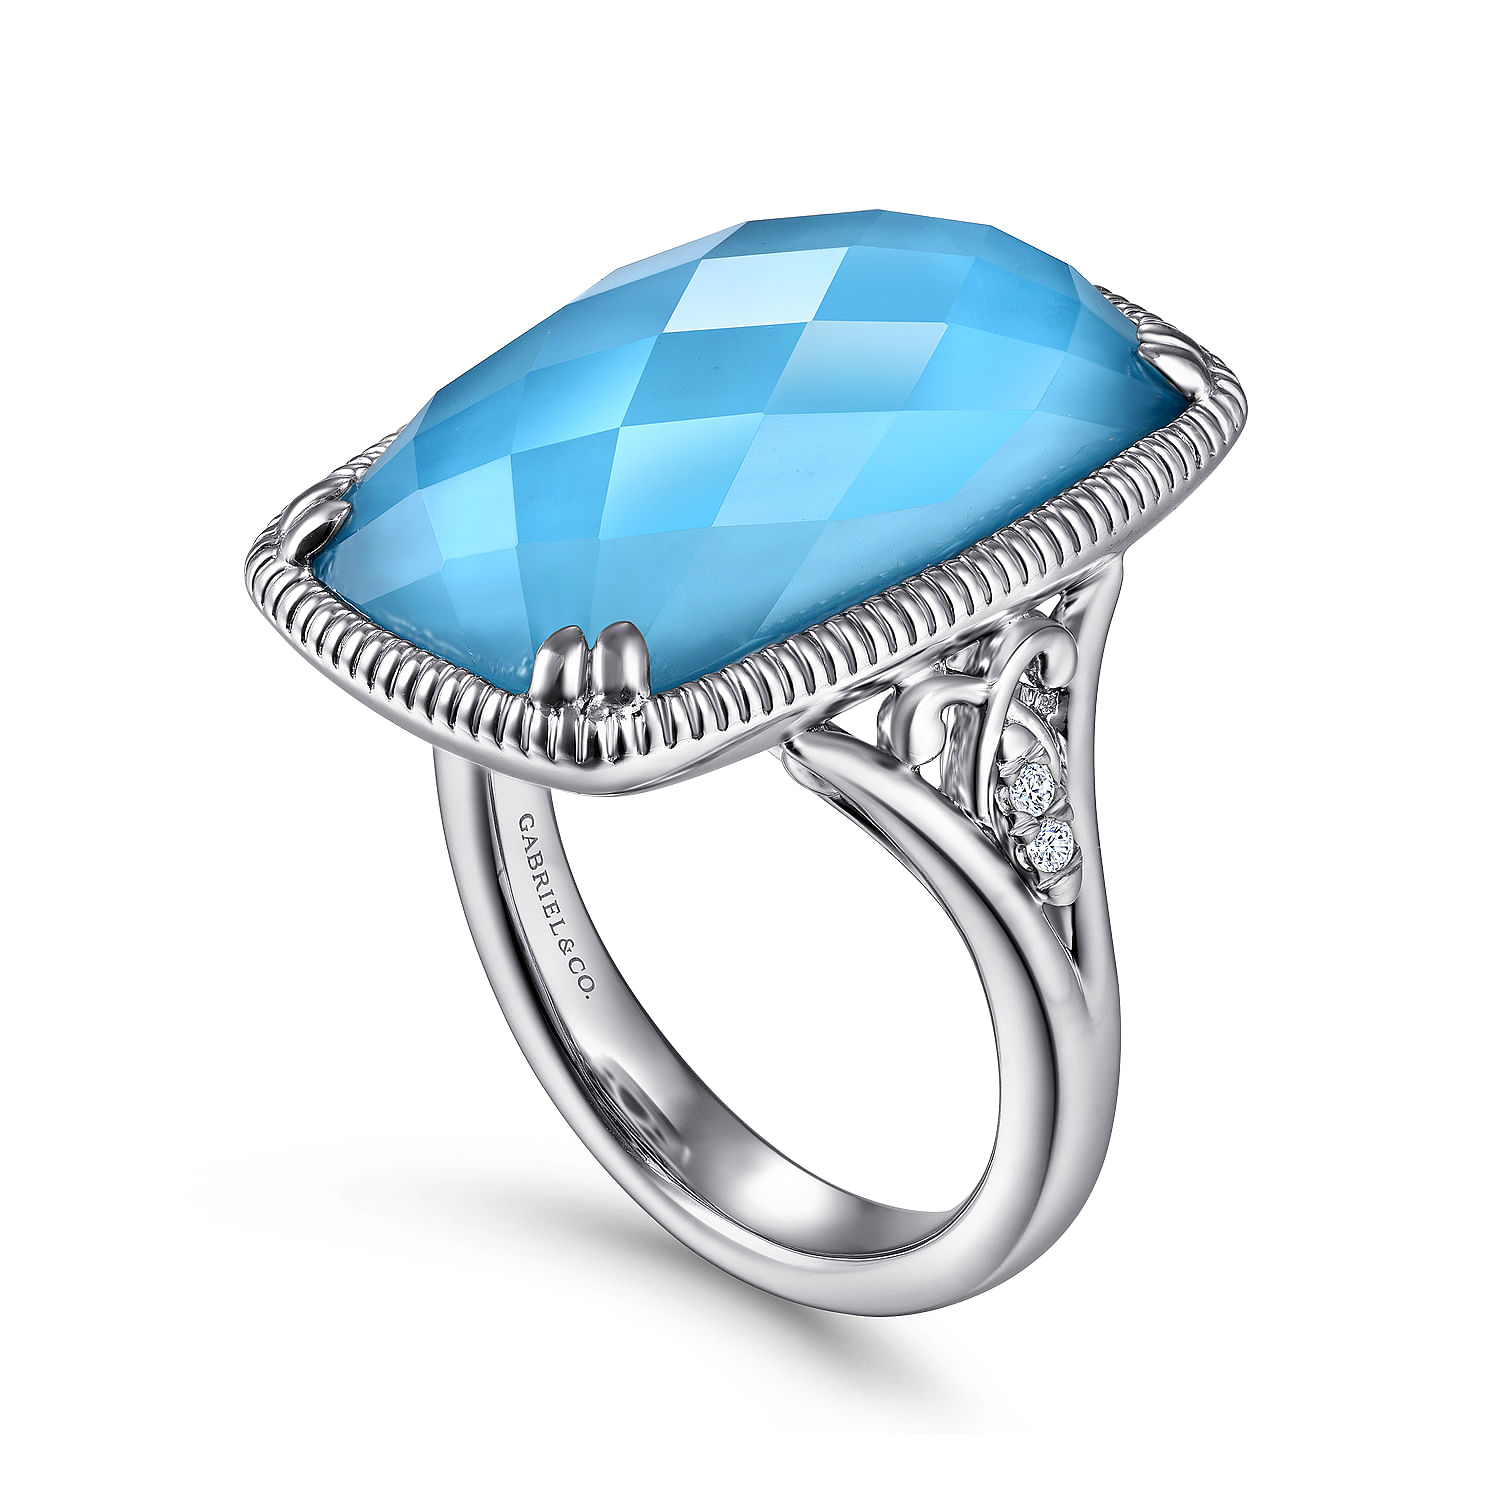 Sterling Silver Rock Crystal/Turquoise Long Cushion Cut Ring